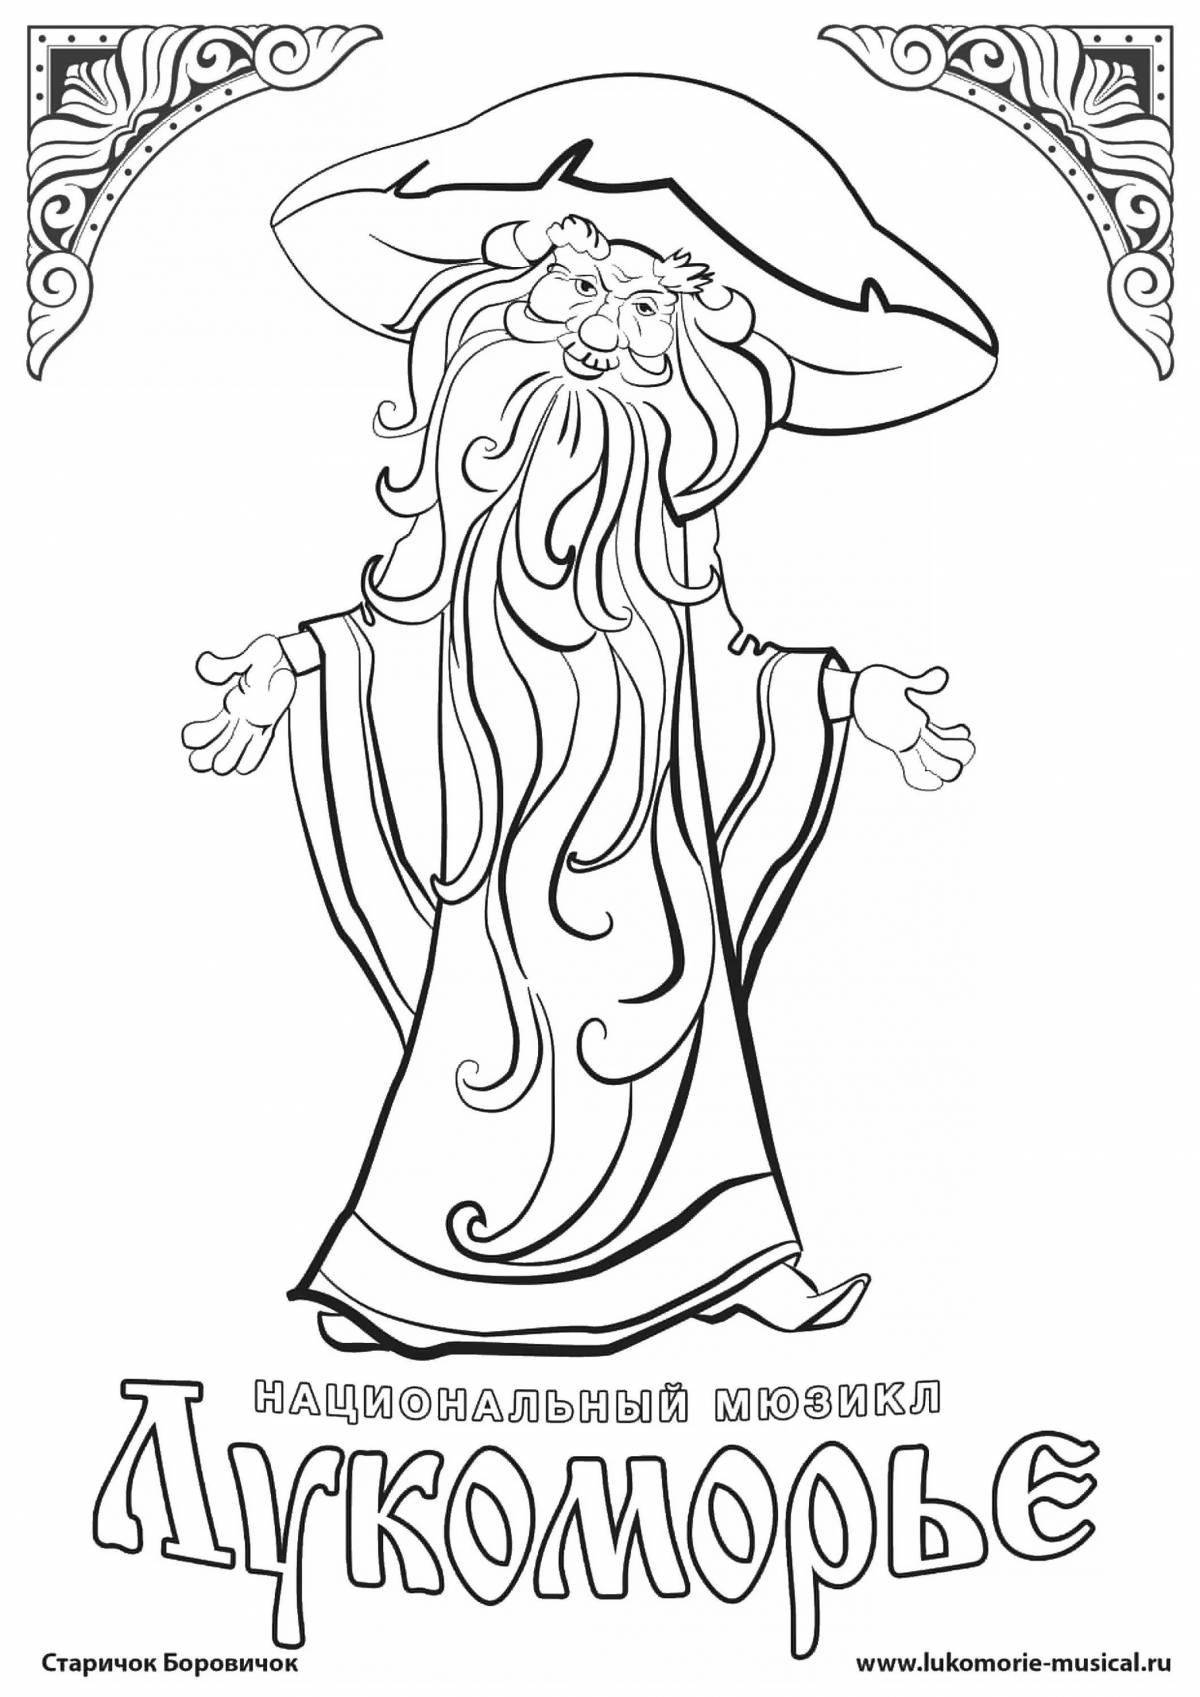 Magic theater poster coloring page